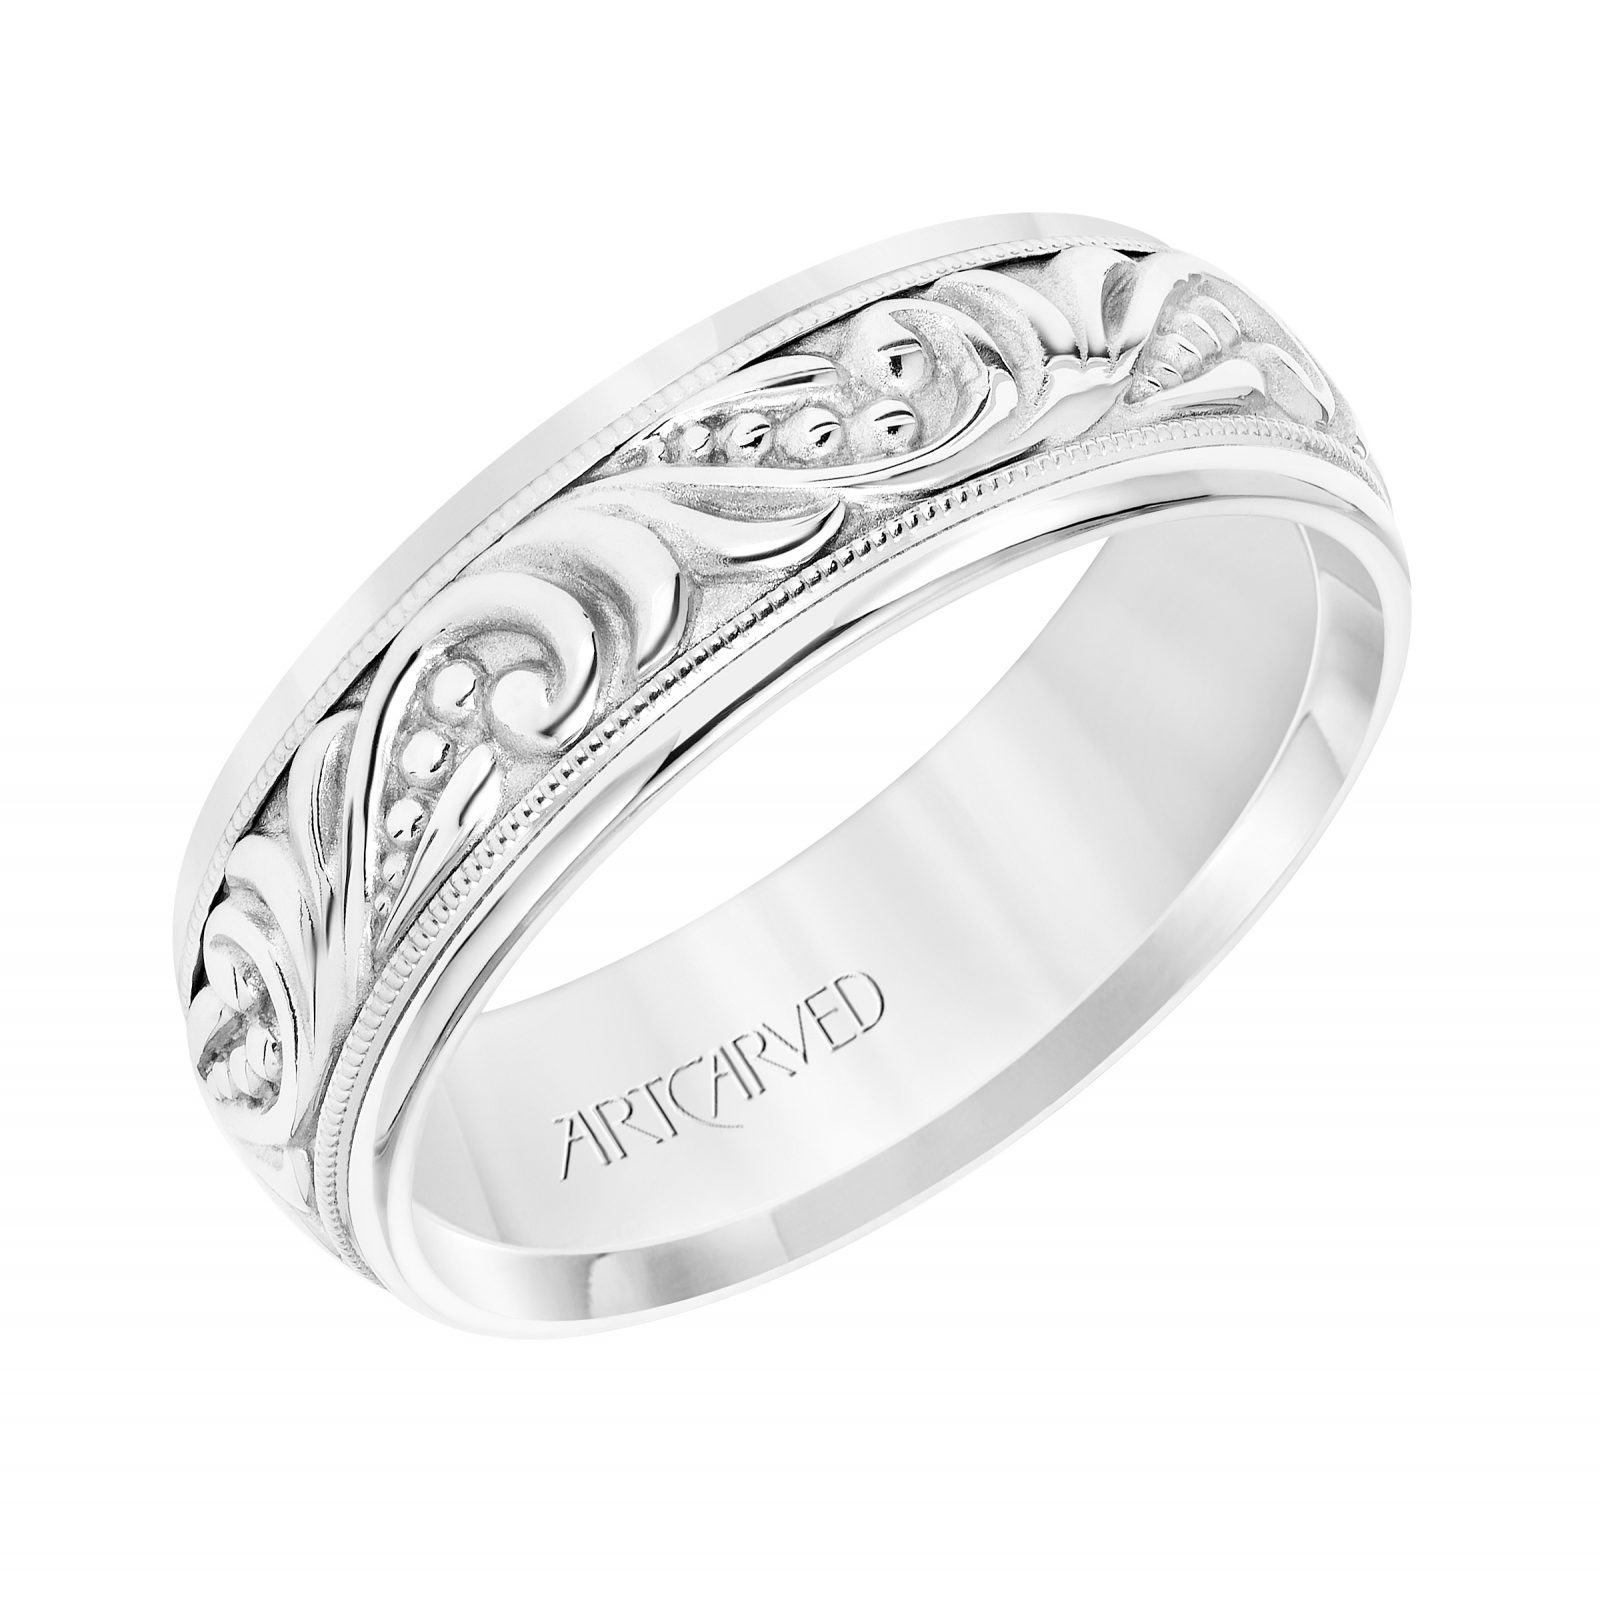 ArtCarved 7mm 14k White Gold Engraved Paisley Pattern Band